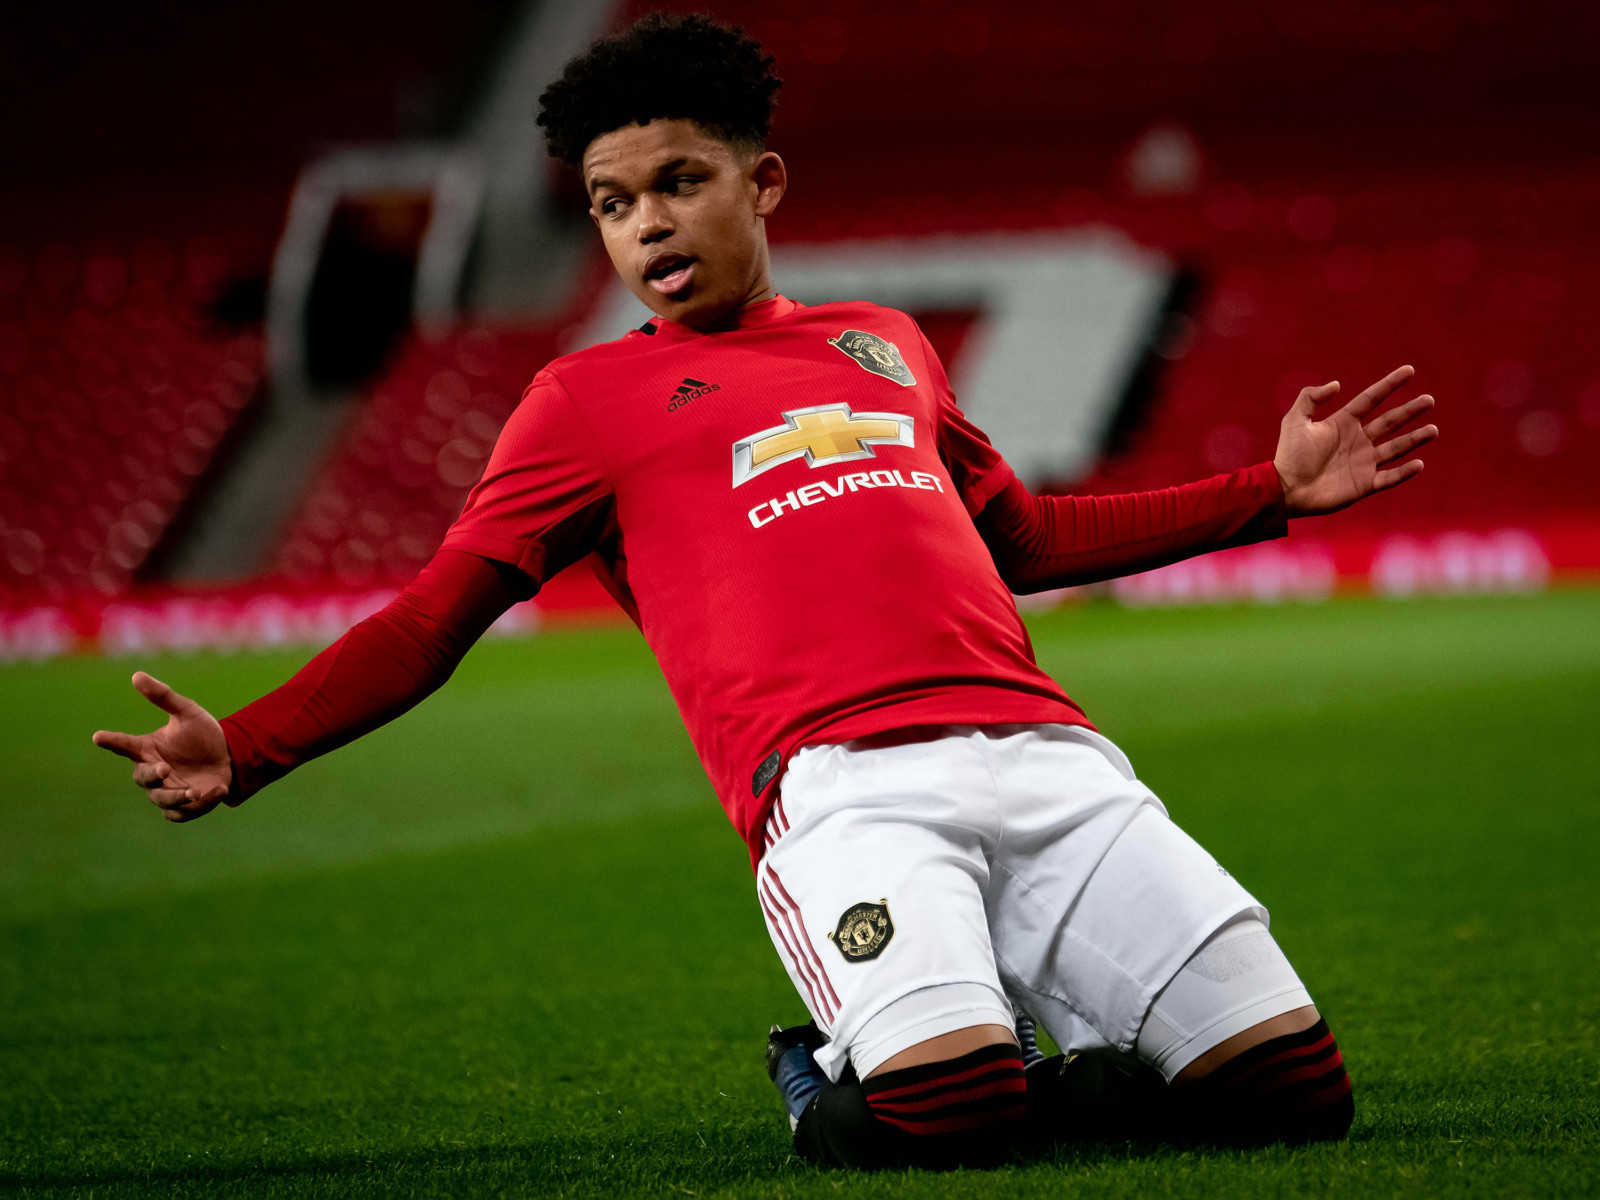 Man Utd Wonderkid Shola Shoretire Has Been Likened To Jay Jay Okocha And Played For The Under 19 Team Aged Just 14 Sporting Excitement